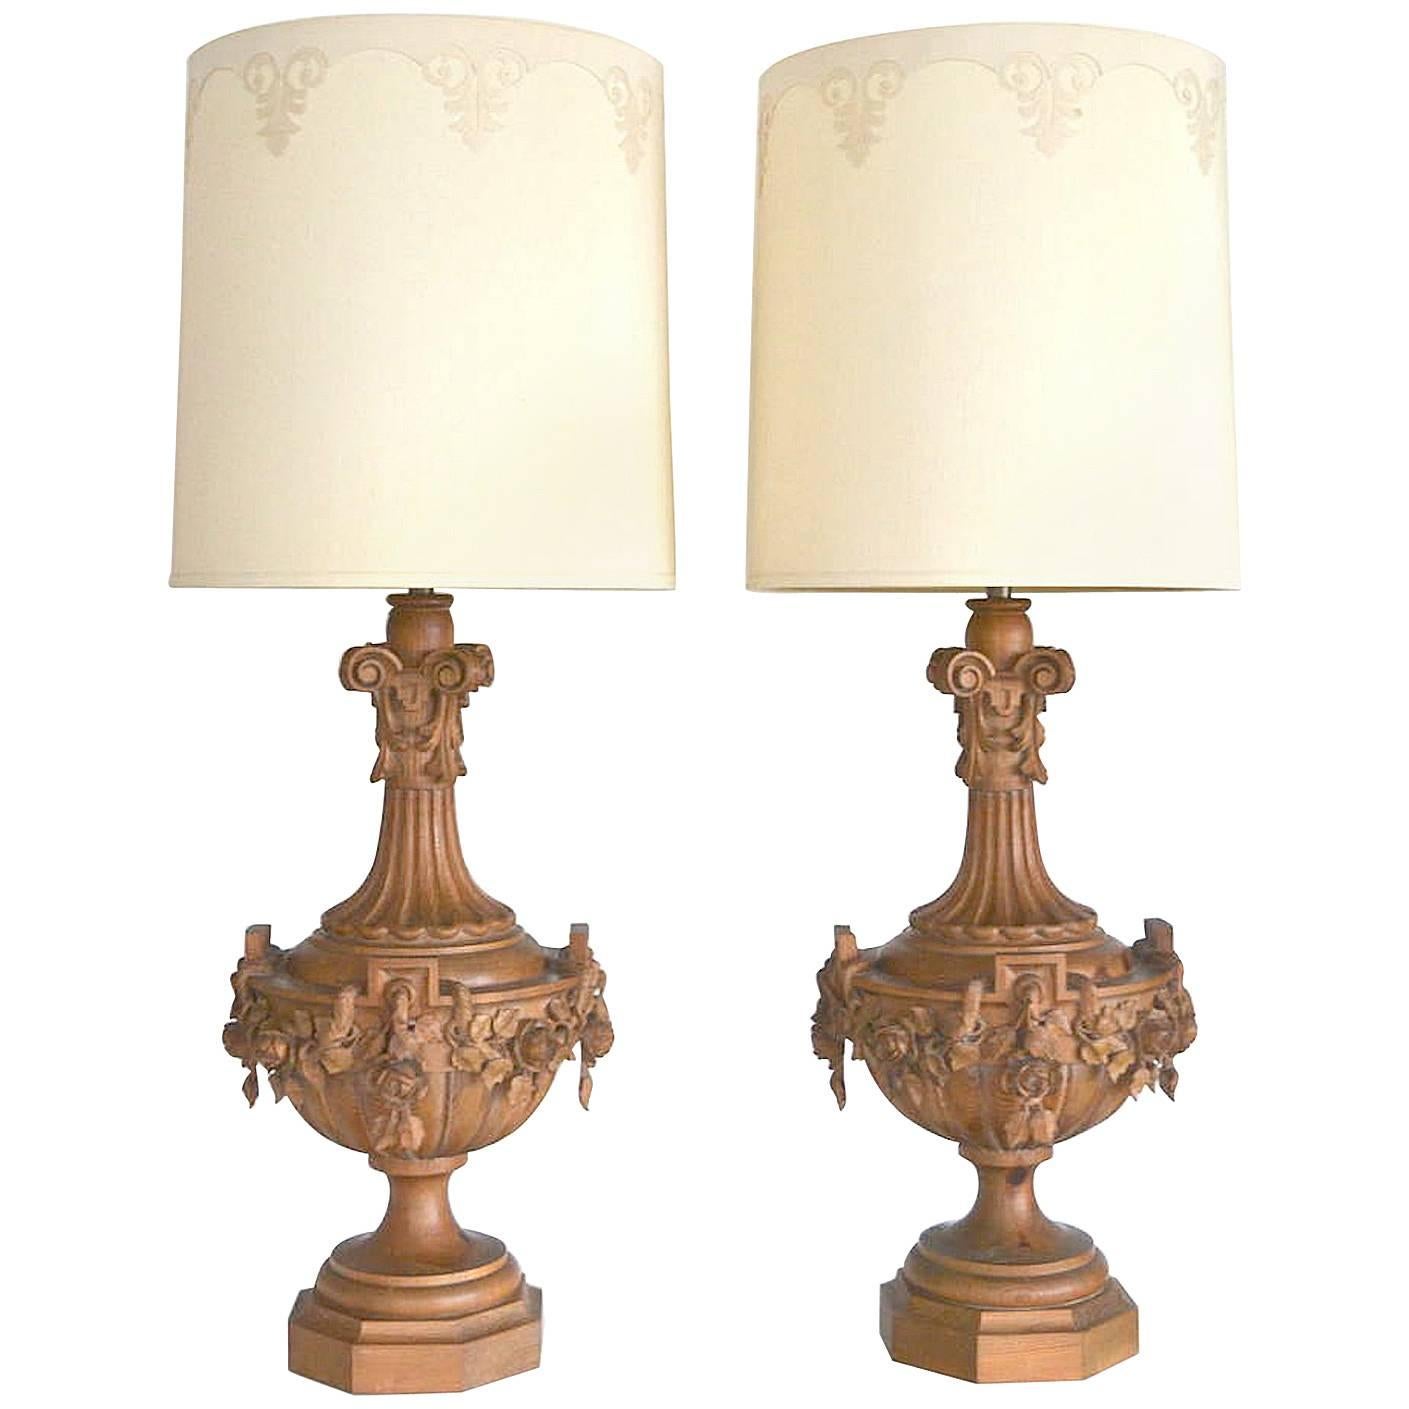 Pair of Hollywood Regency Carved Wooden Urn Form Table Lamps by Marbro